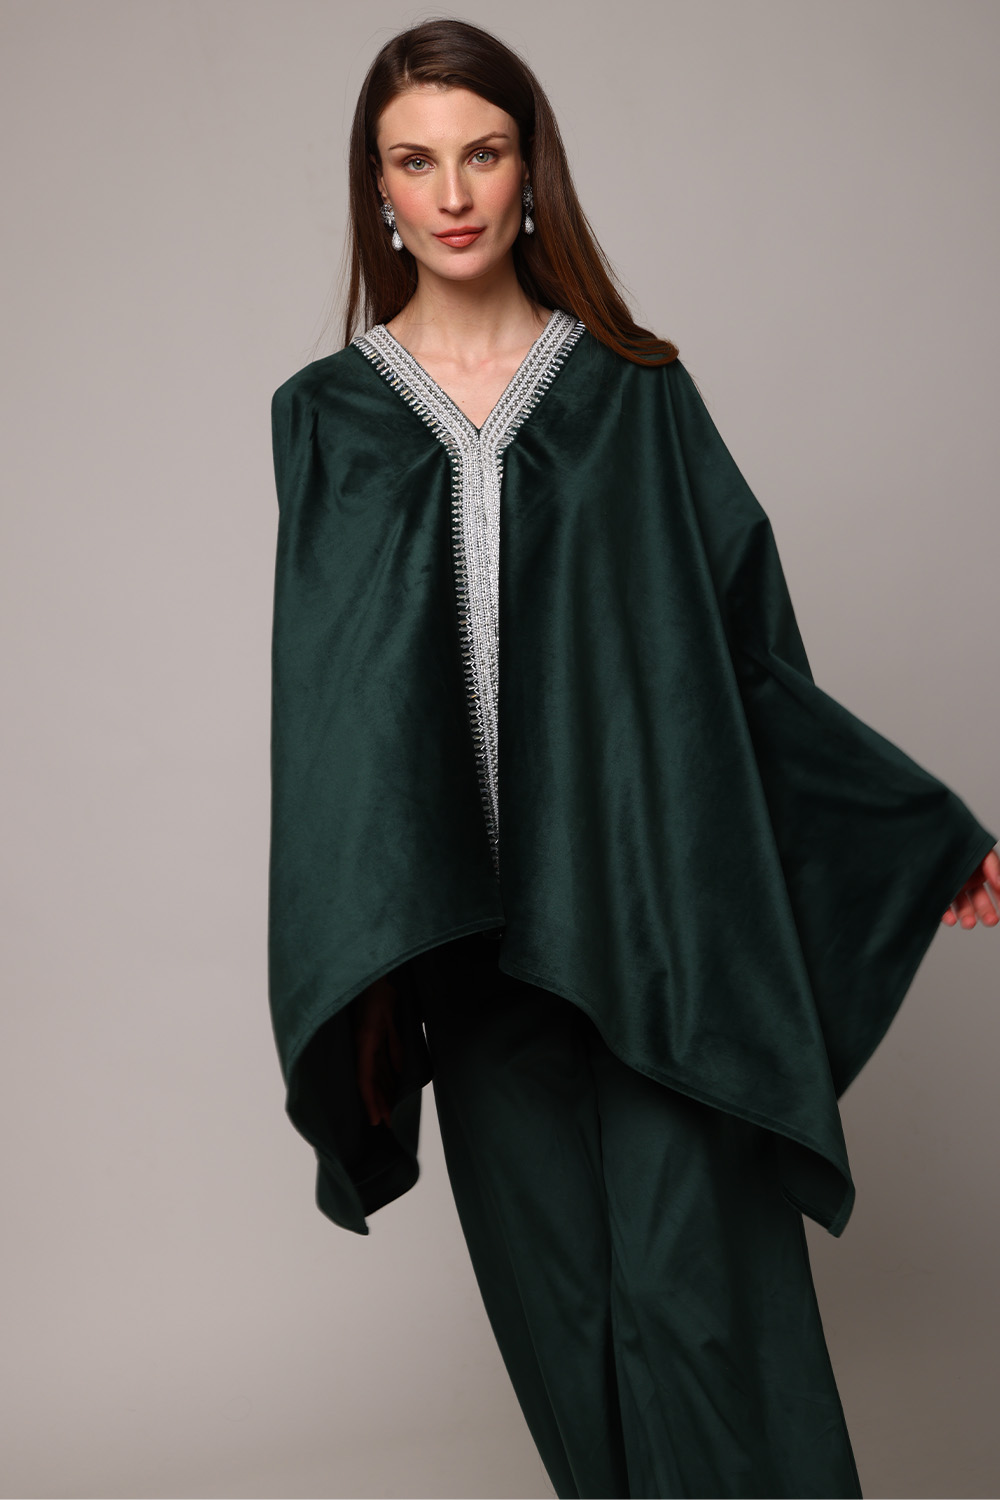 Multifaceted Bottle Green Cape